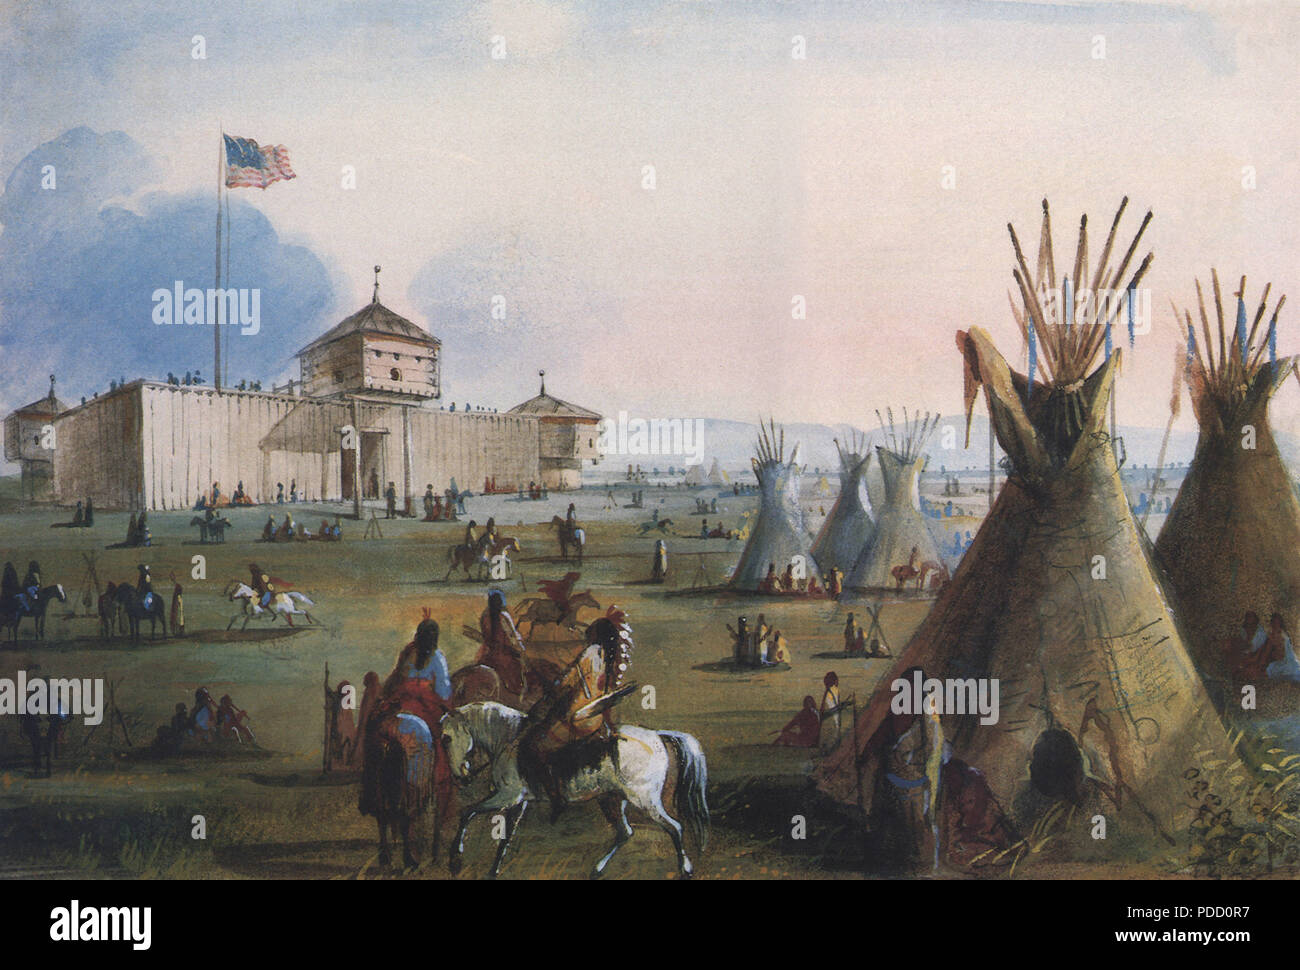 Sioux an Ft. Laramie 1837, Miller, Alfred Jakob, 1837. Stockfoto